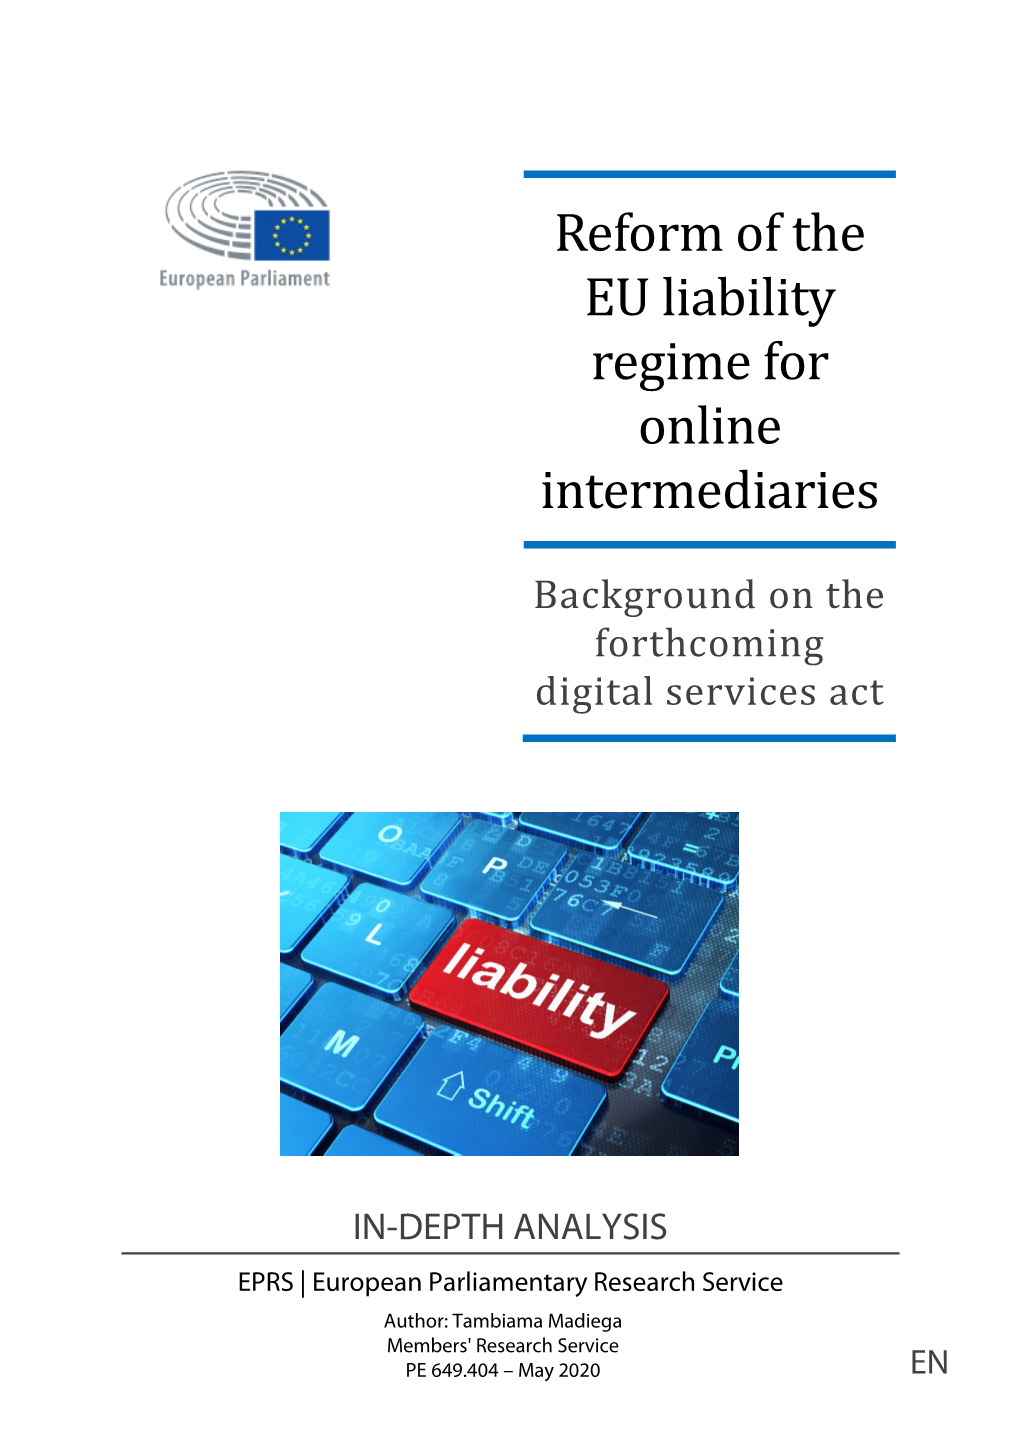 Reform of the EU Liability Regime for Online Intermediaries